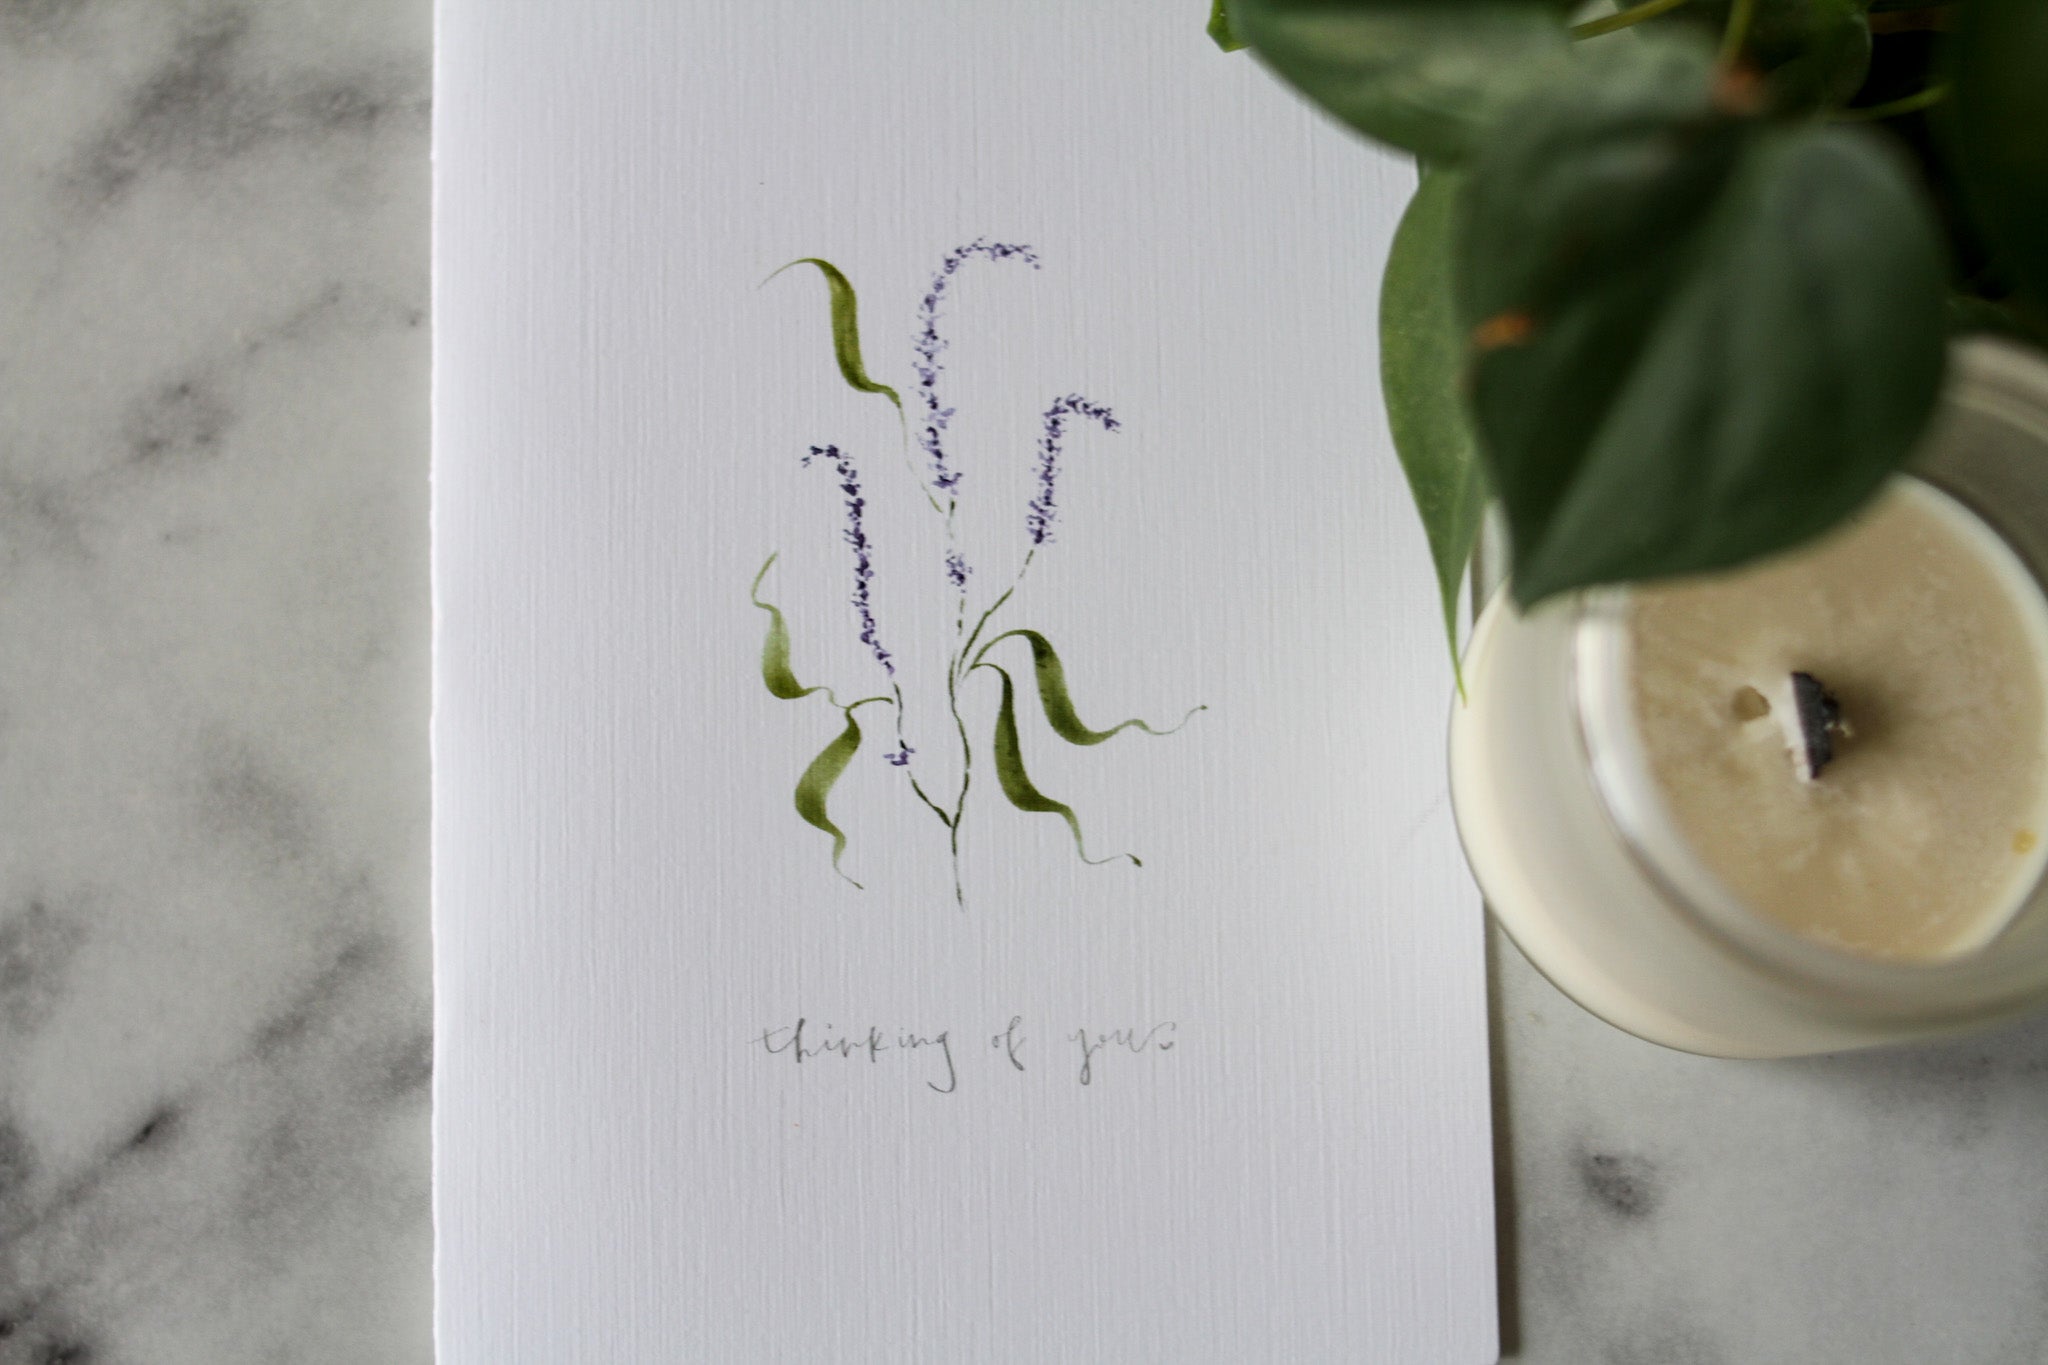 Lavender "thinking of you" card